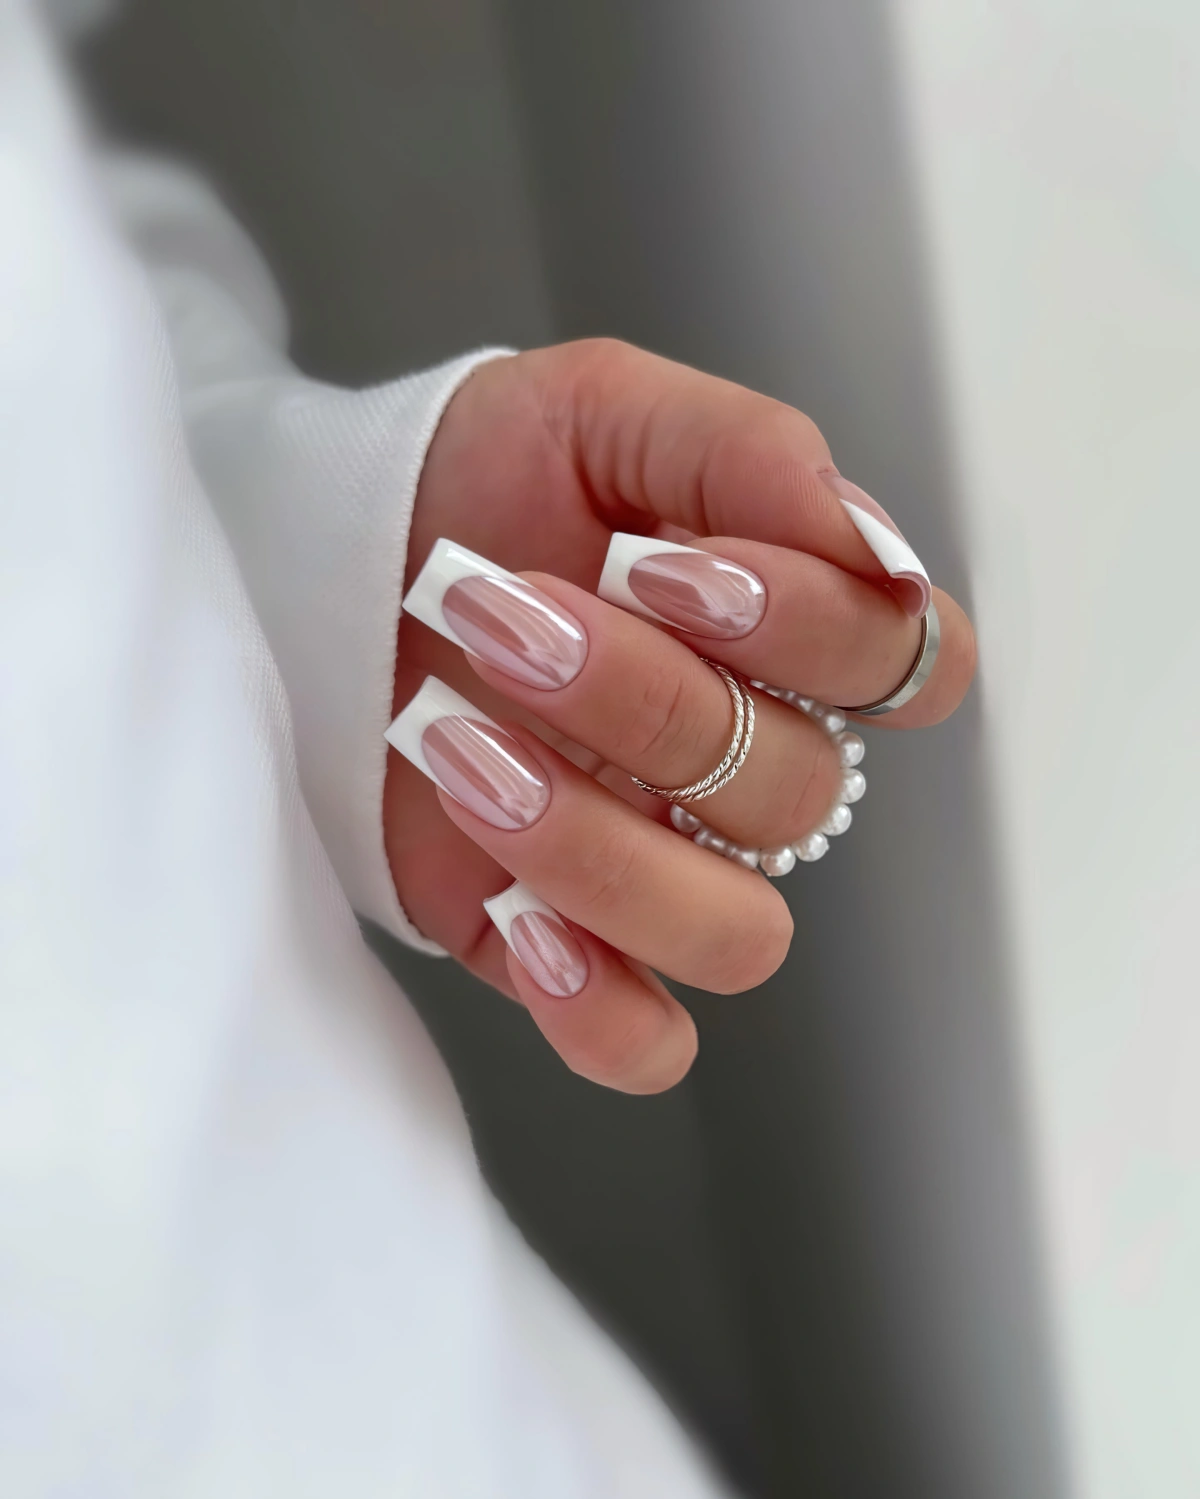 ongles effet perle finition forme carree manucure french blanche